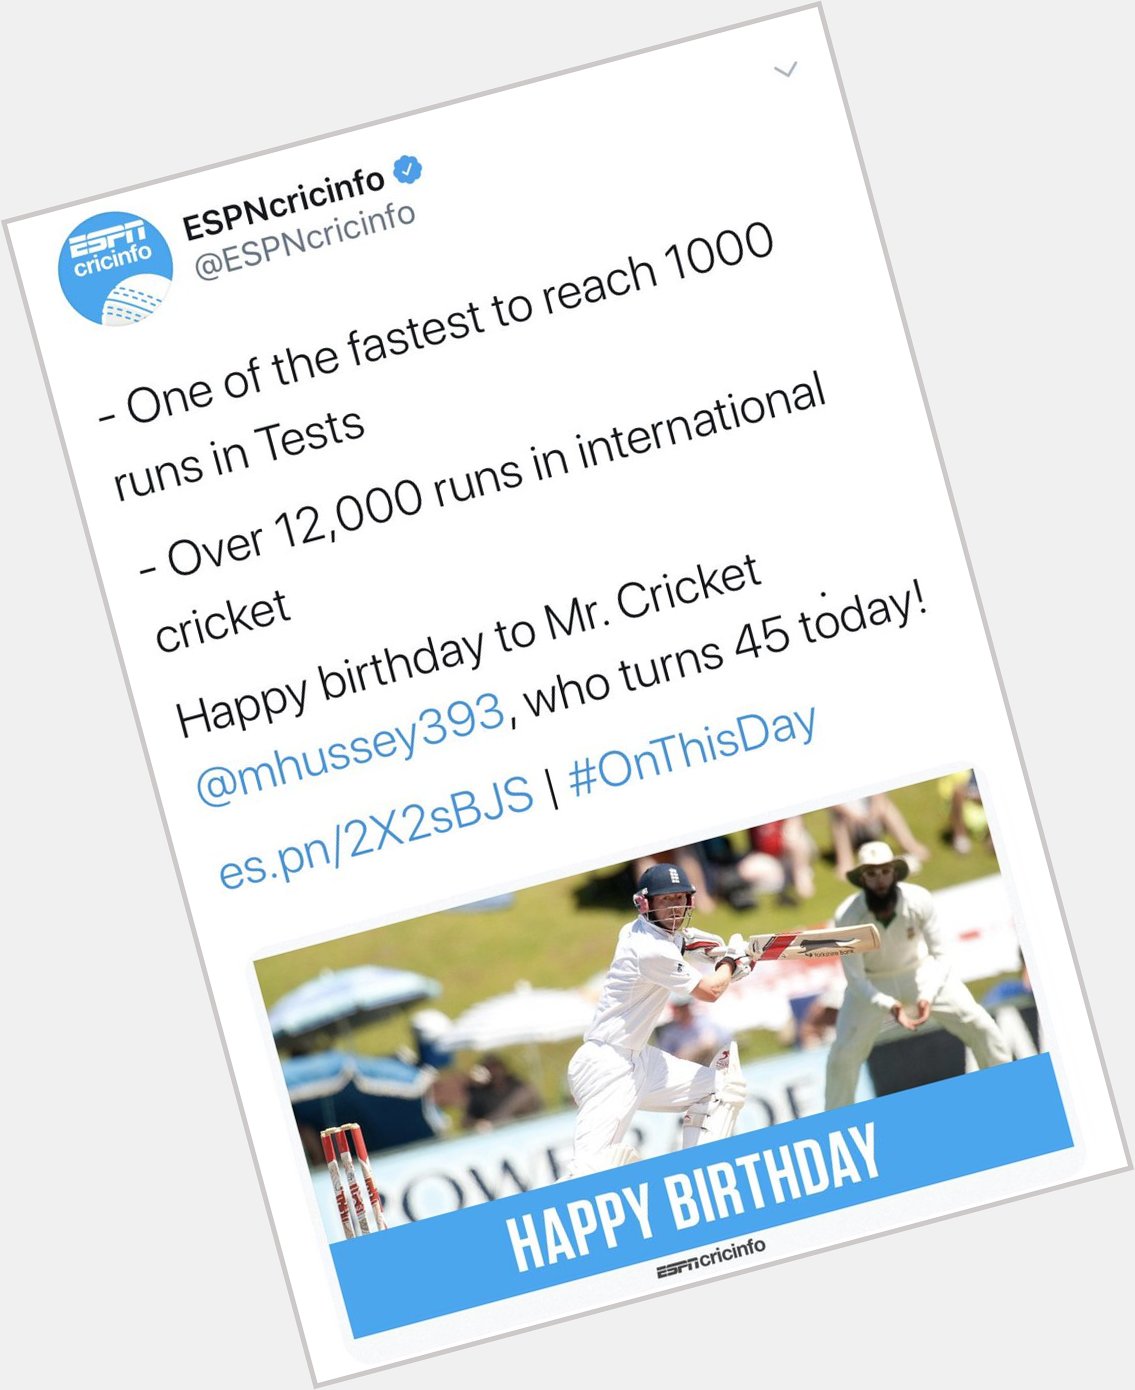 In true Mike Hussey style, Cricinfo just wished him a happy birthday while attaching a picture of Paul Collingwood. 